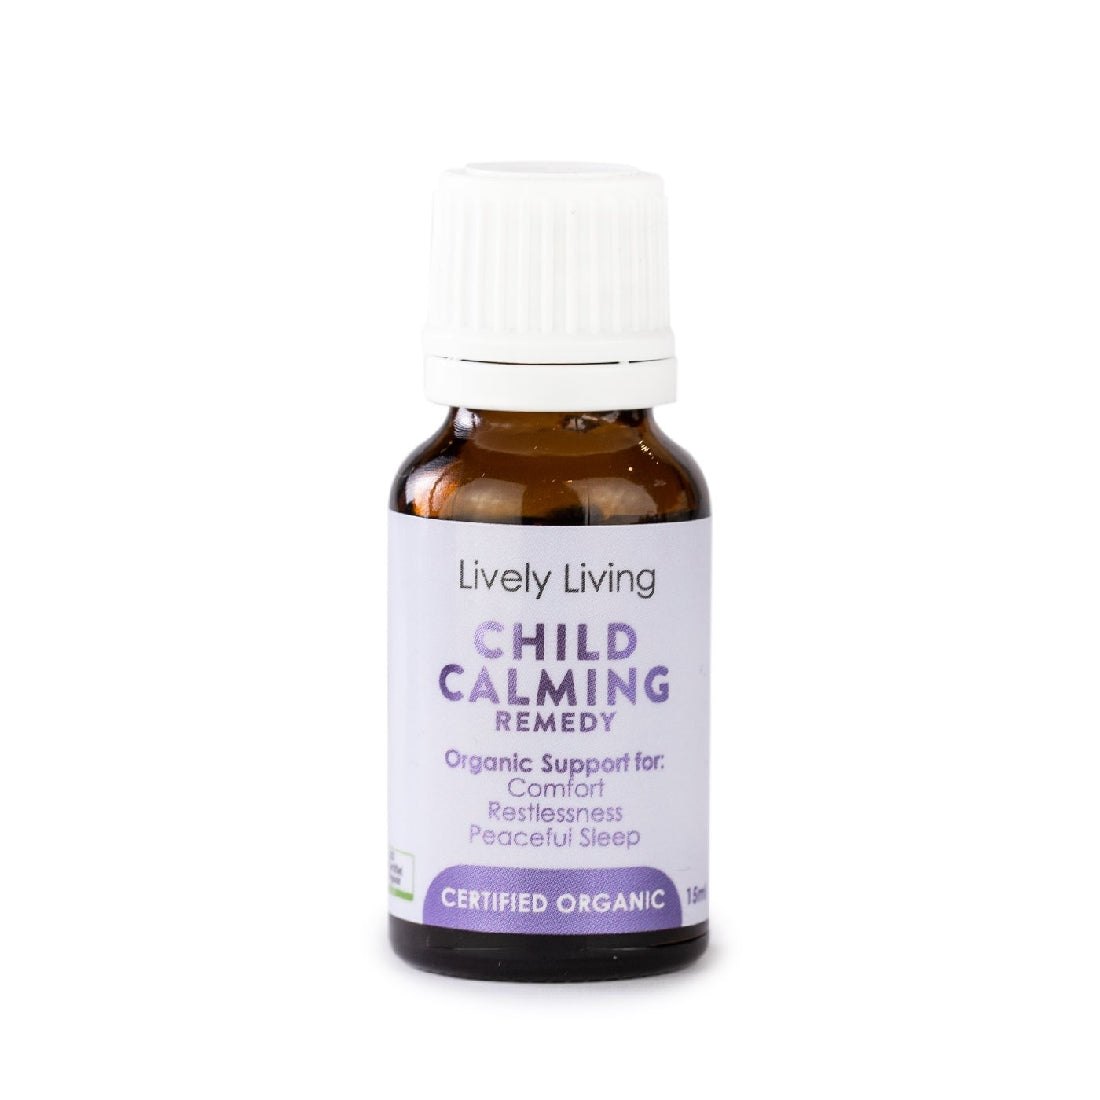 Lively Living - Child Calming Remedy Certified Organic 15ml